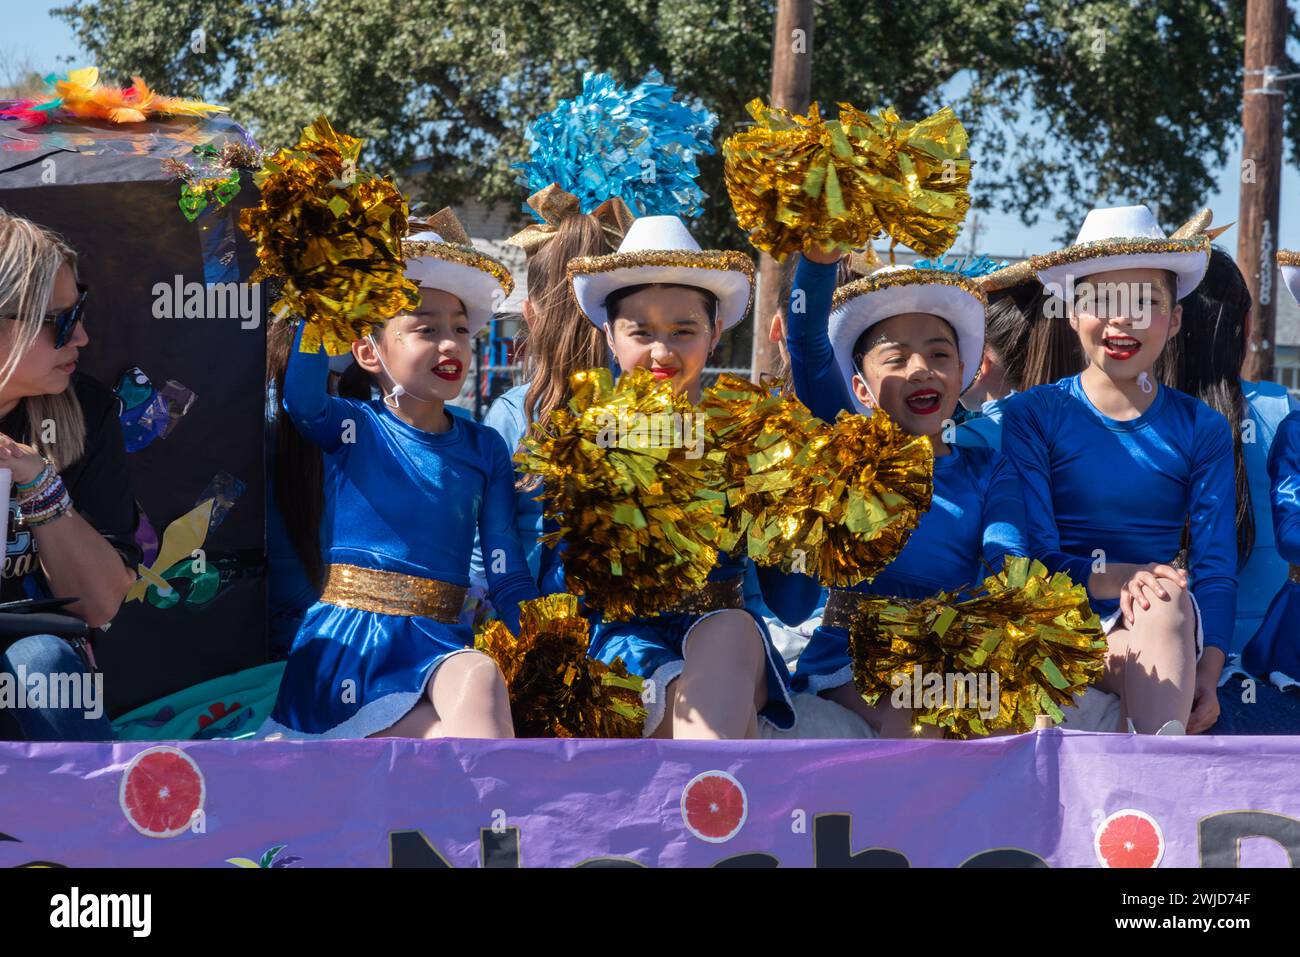 Young girls wearing cowboy hats, waving gold pom poms ride on a float in  2024 Parade of Oranges, part of 92nd Texas Citrus Fiesta, Mission, Texas USA. Stock Photo